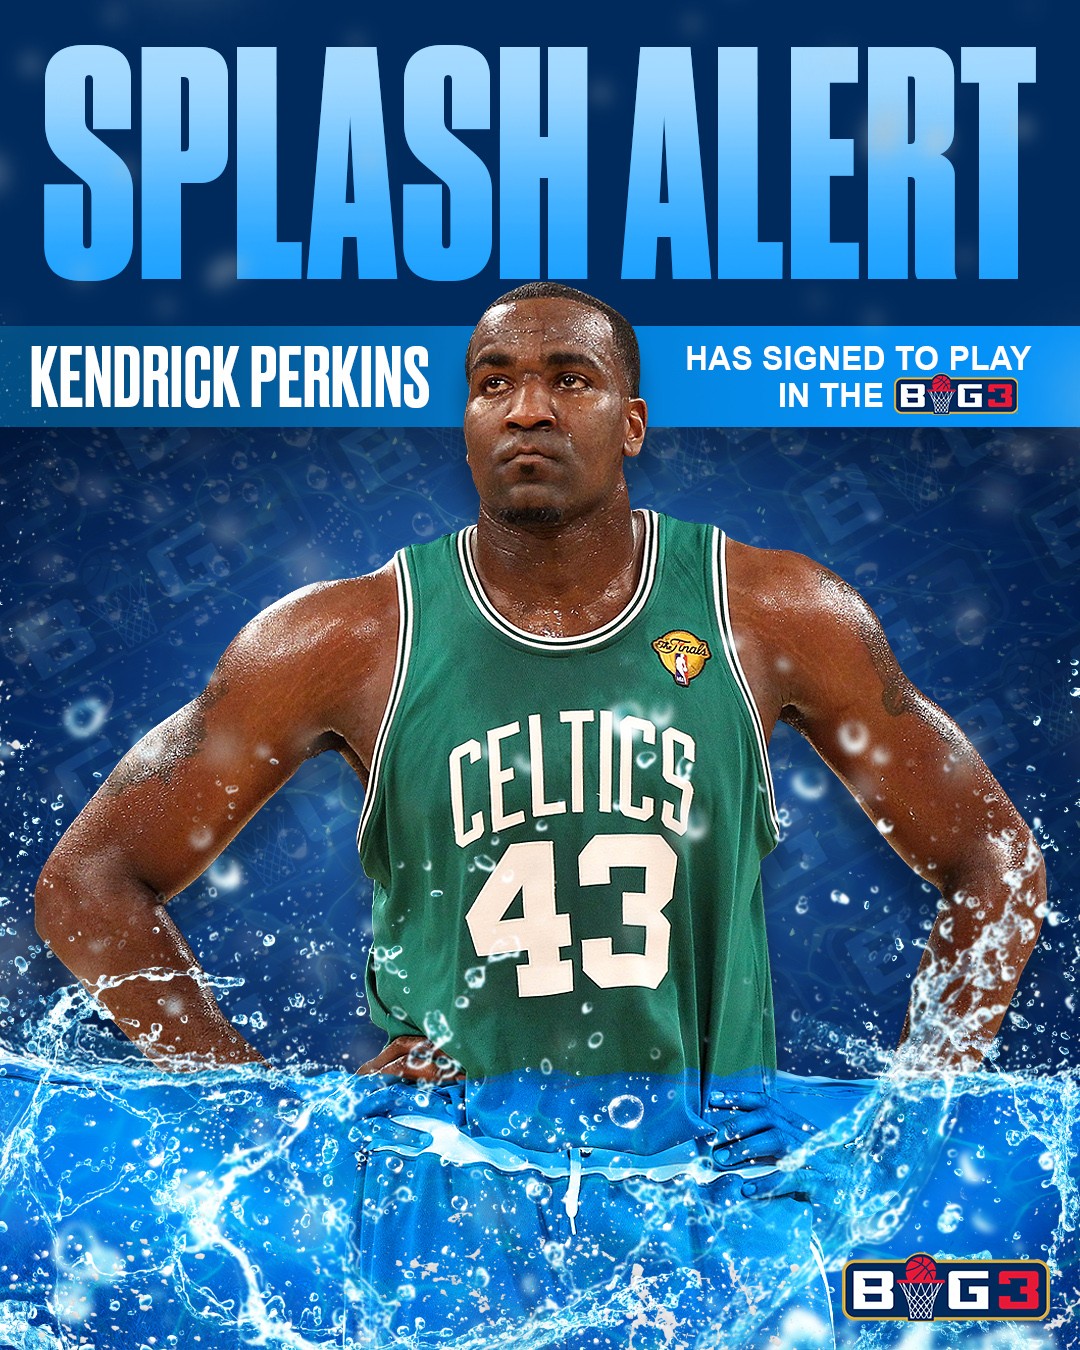 Kendrick Perkins Is the NBA's Hottest Flamethrower - Sports